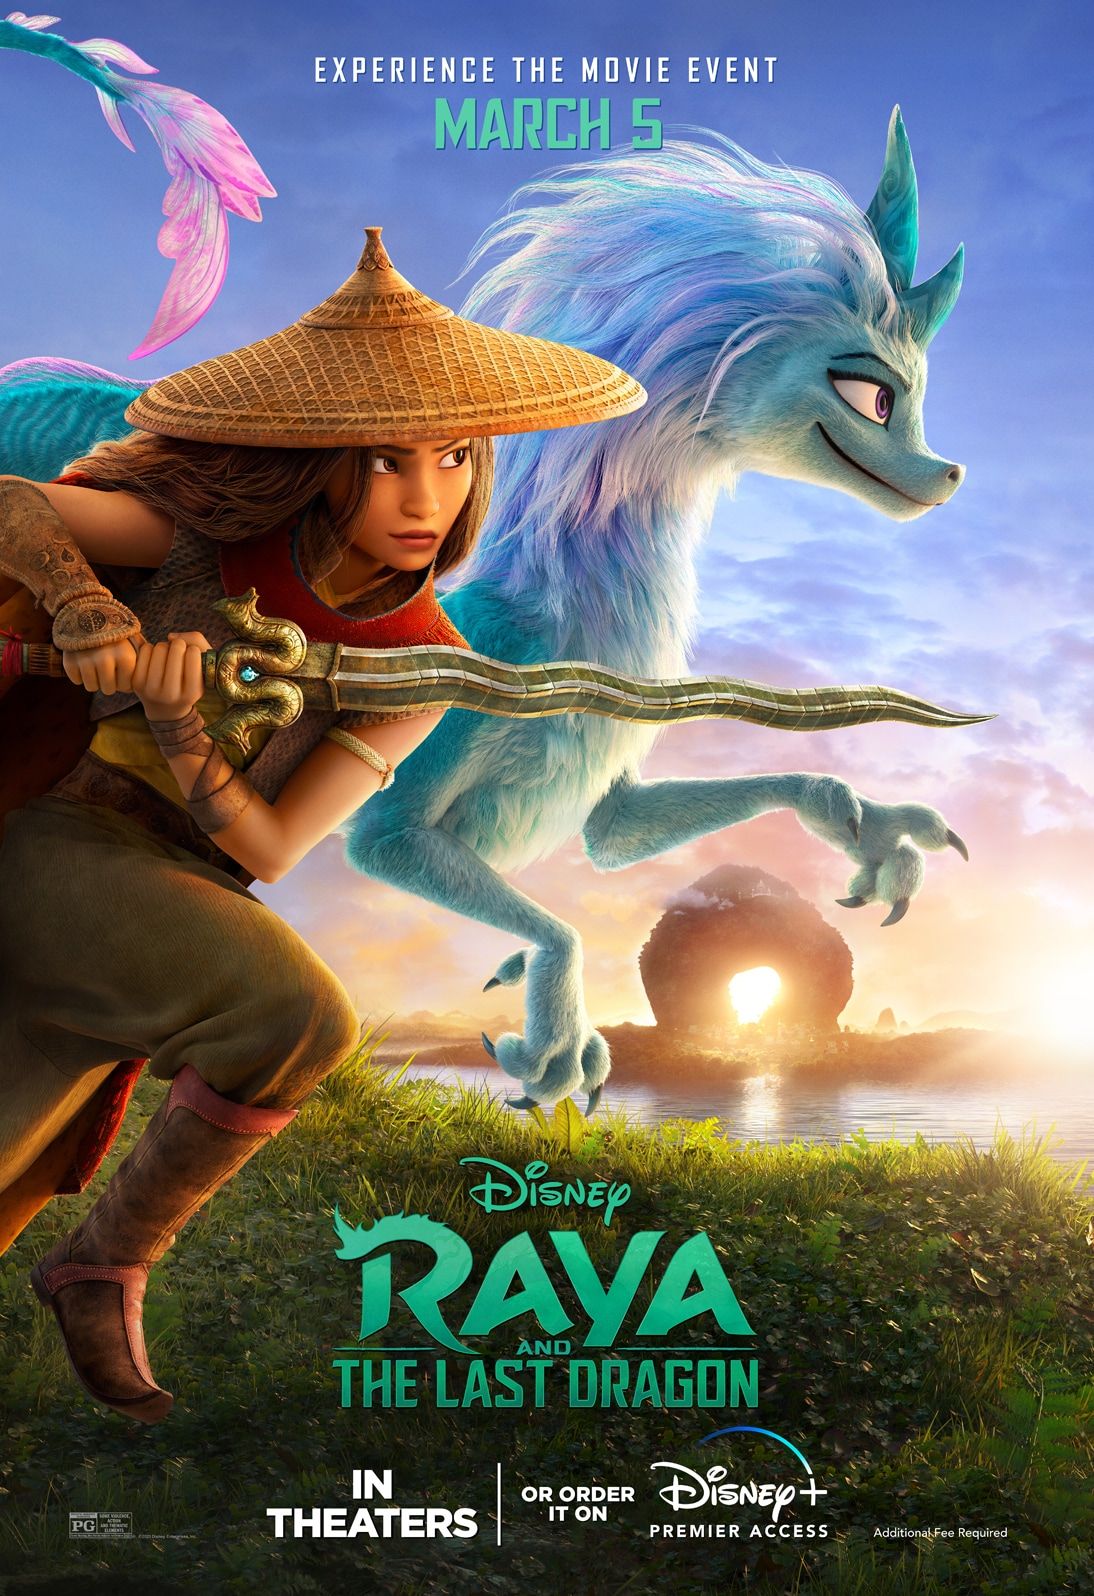 Raya and the last dragon full movie watch online free